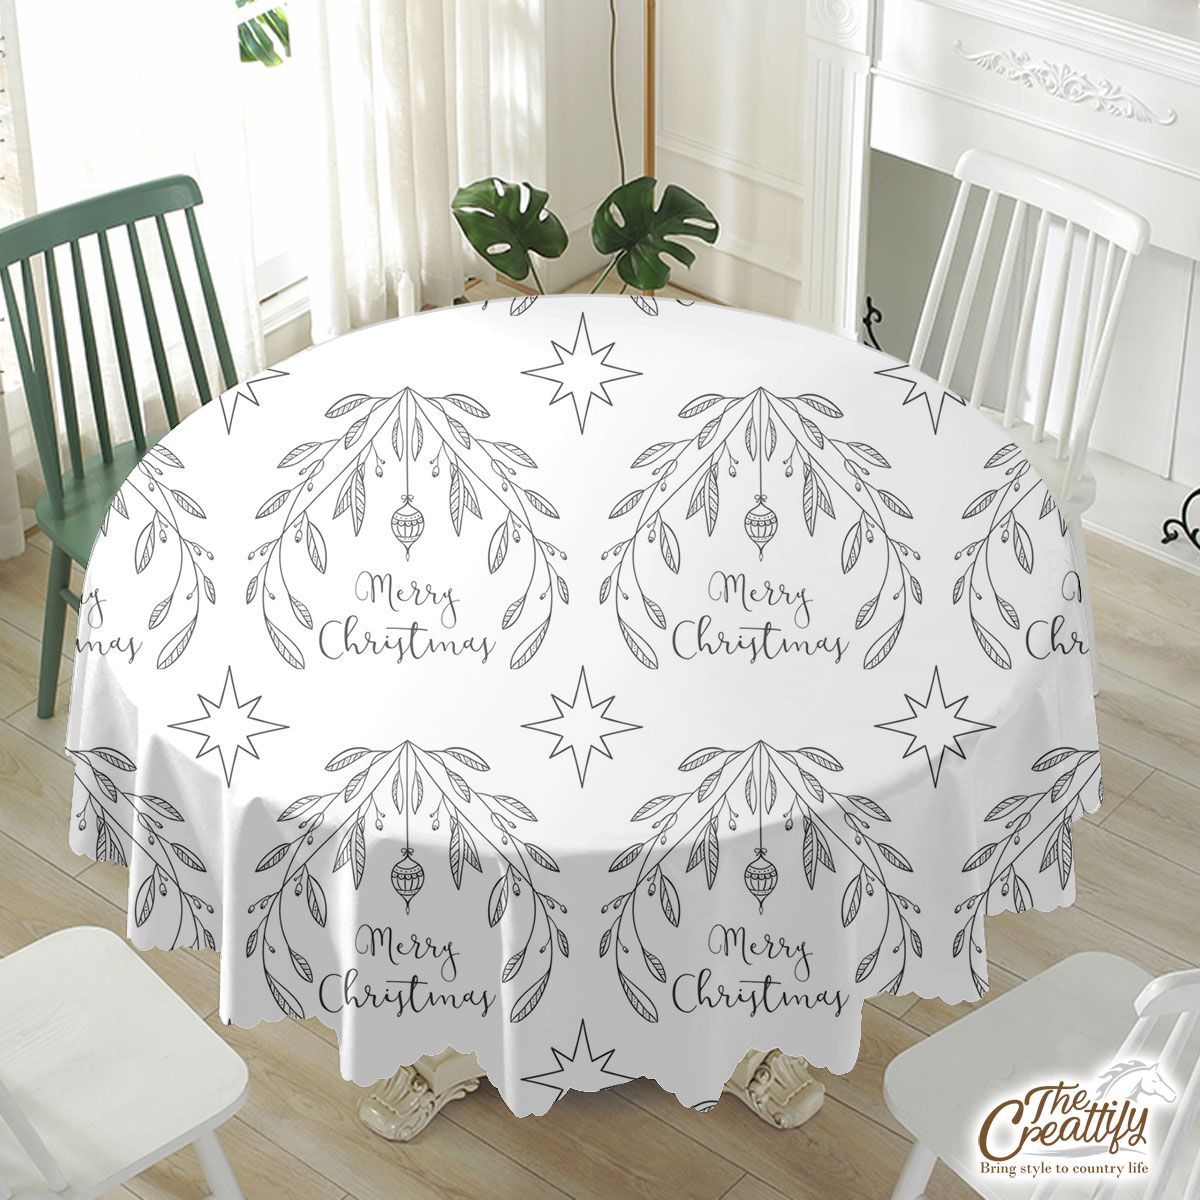 Merry Christmas With Black And White Christmas Mistletoe Waterproof Tablecloth